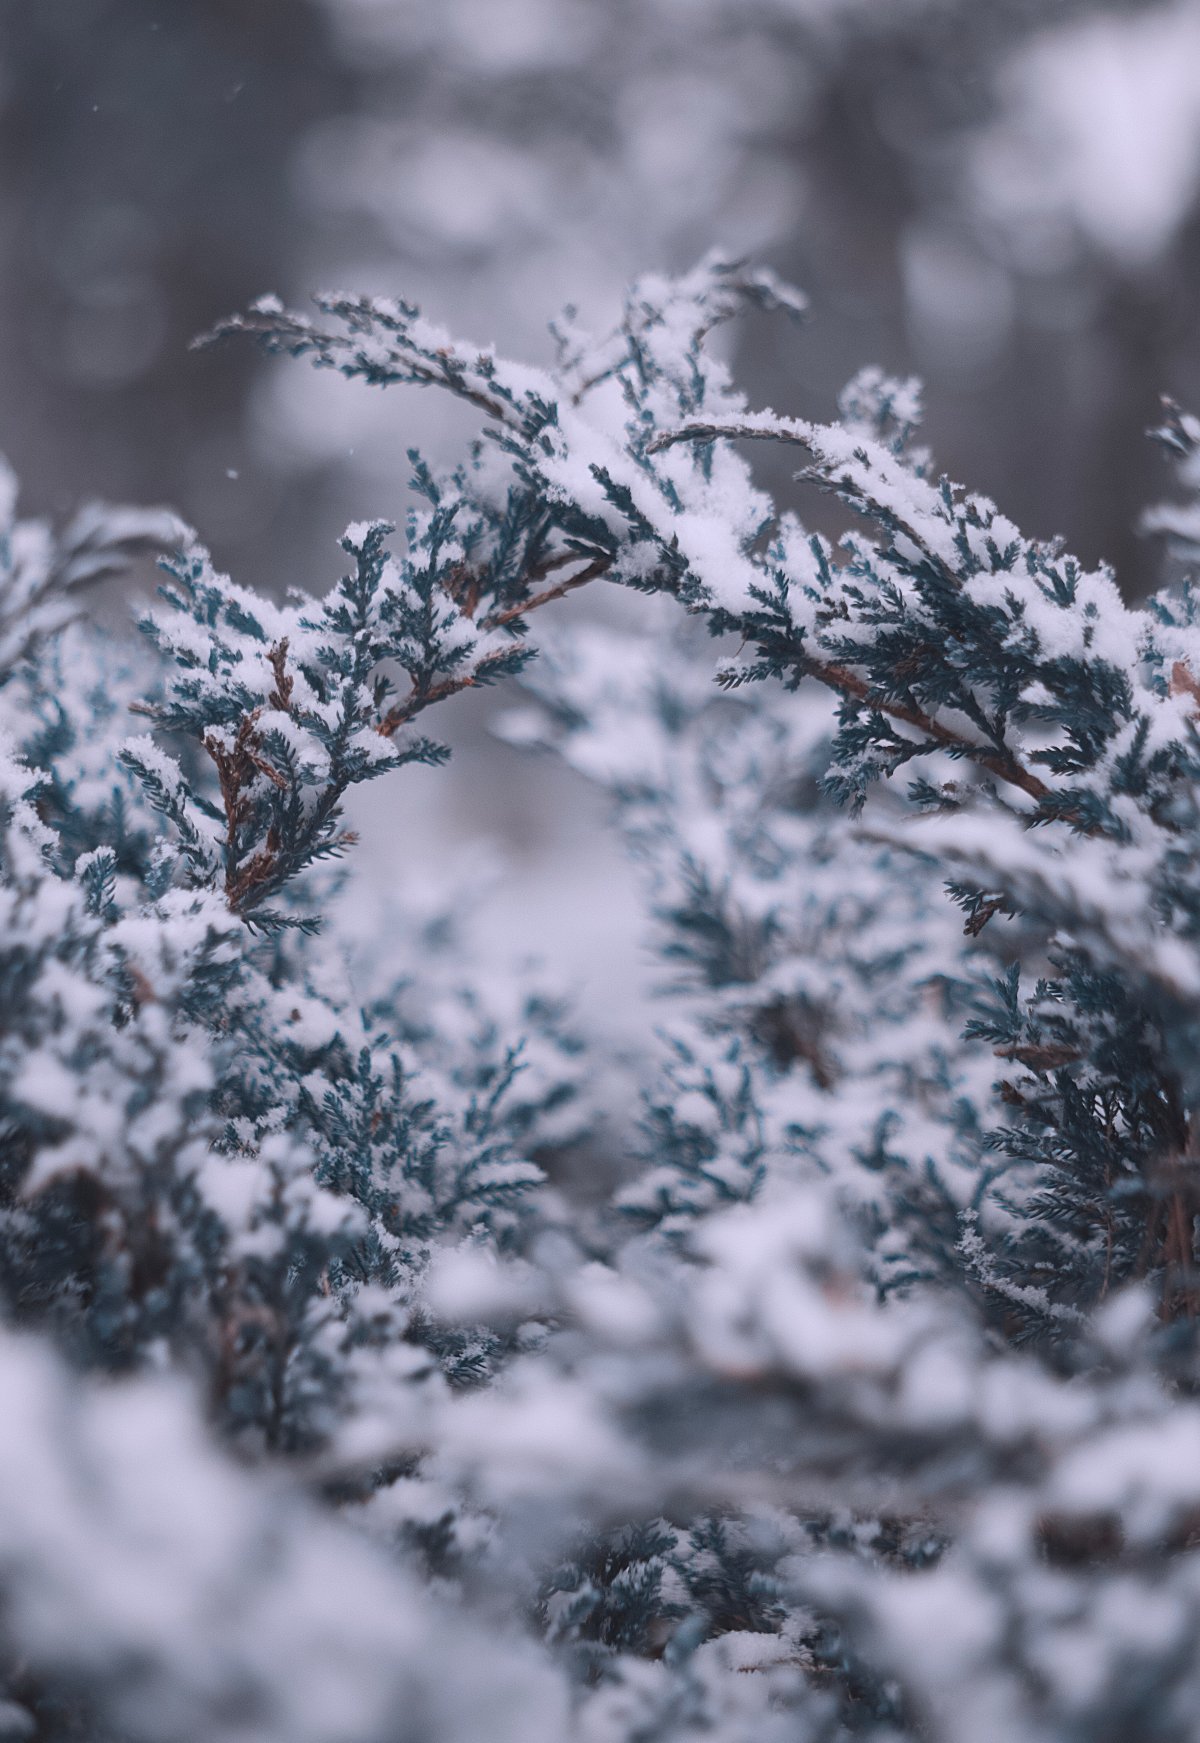 Close-up picture of snowy pine trees in winter